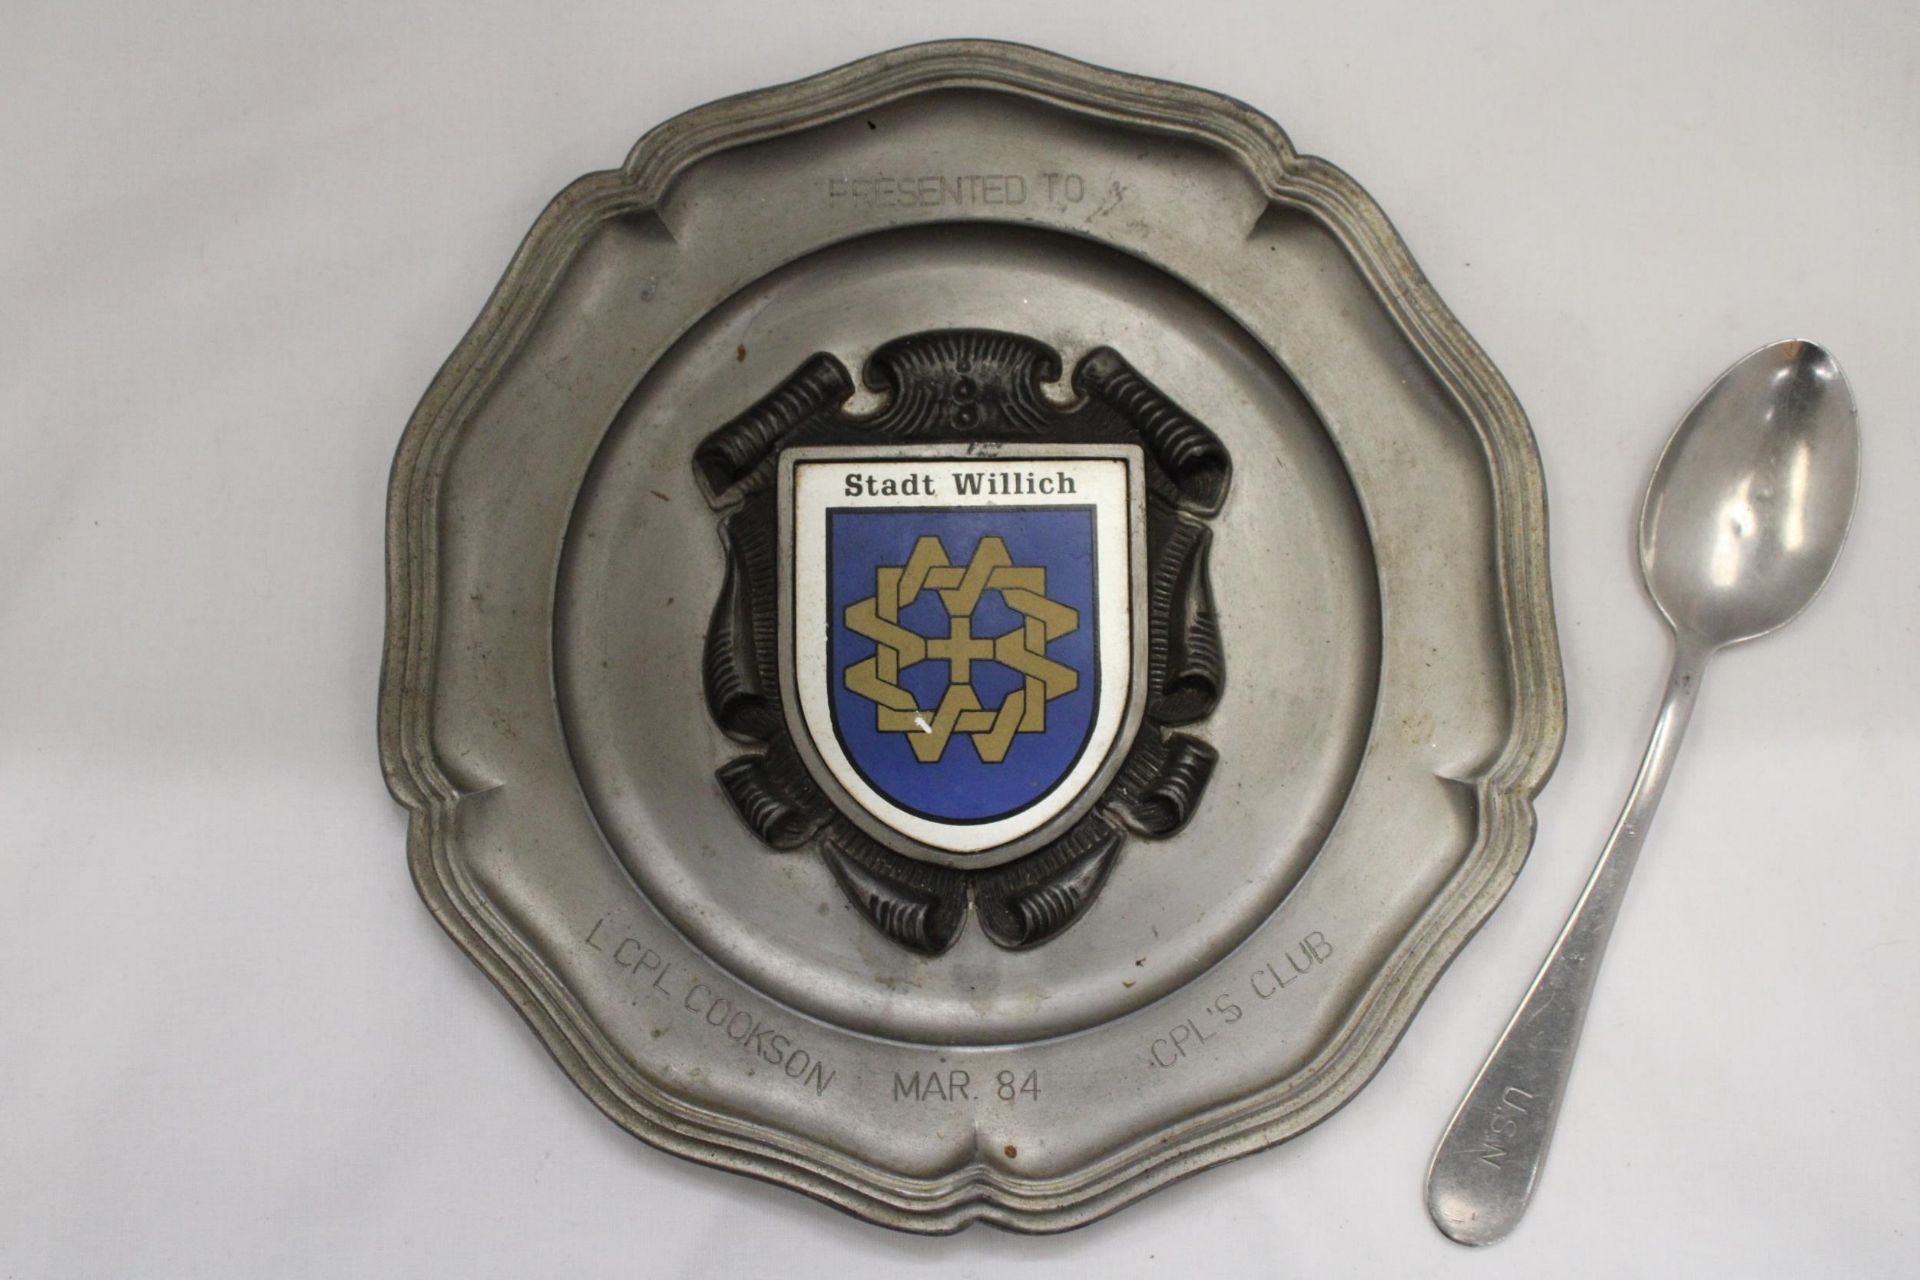 A VINTAGE PEWTER TRAY AND A UNITED STATES NAVY SPOON - Image 2 of 7